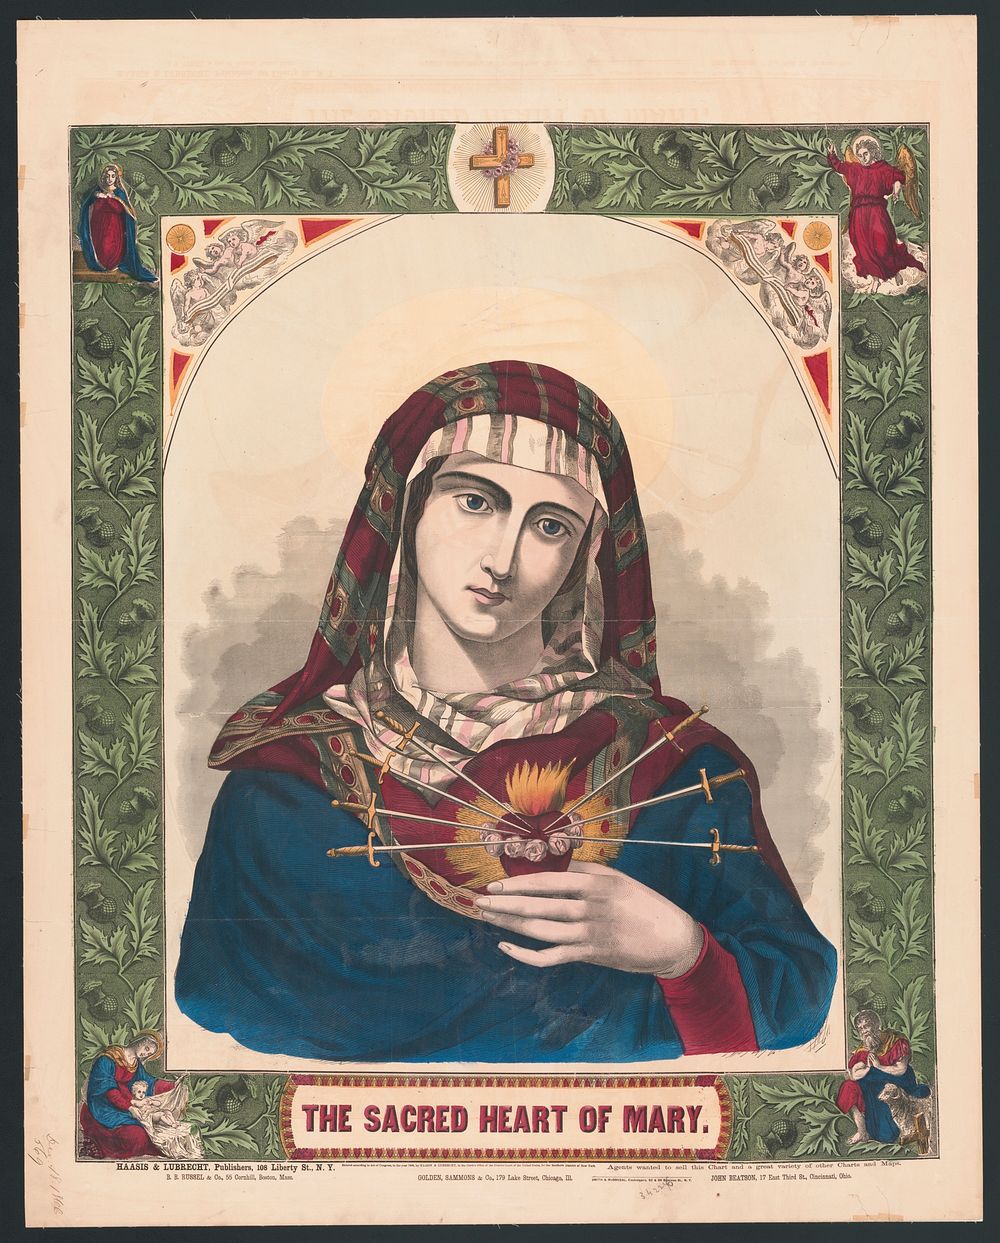 The sacred heart of Mary